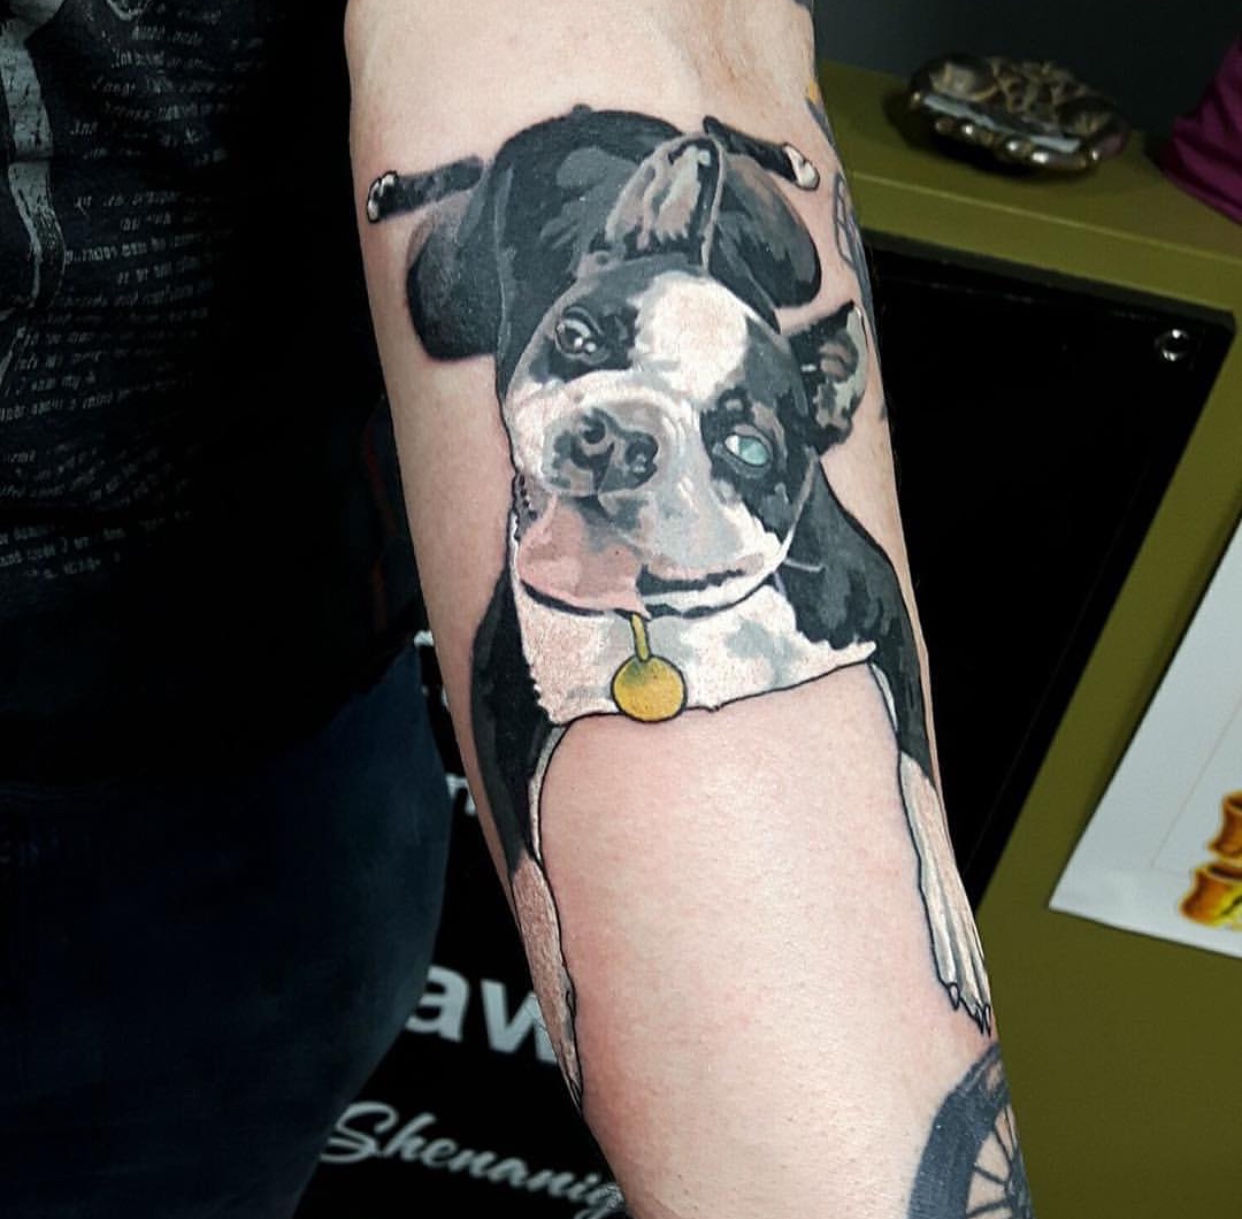 lying down black and white Boston Terrier painting style tattoo on the forearm